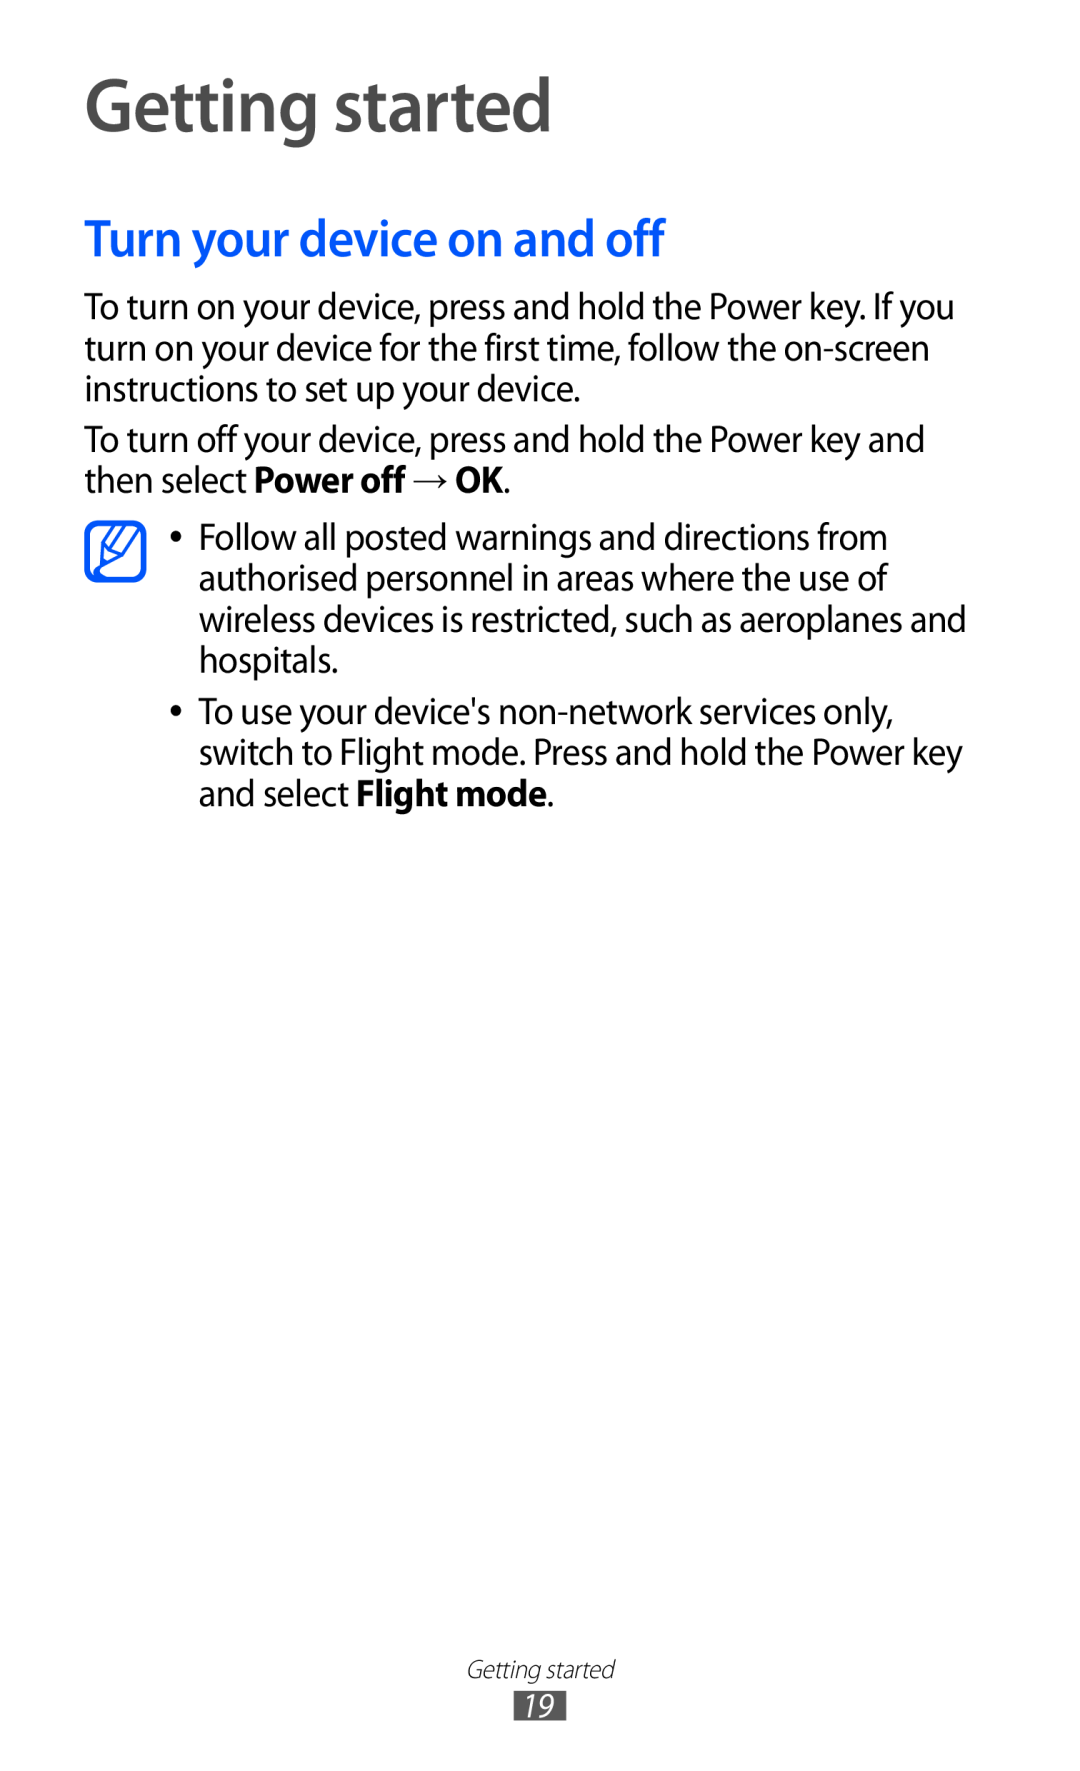 Samsung GT-I9070 user manual Getting started, Turn your device on and off 